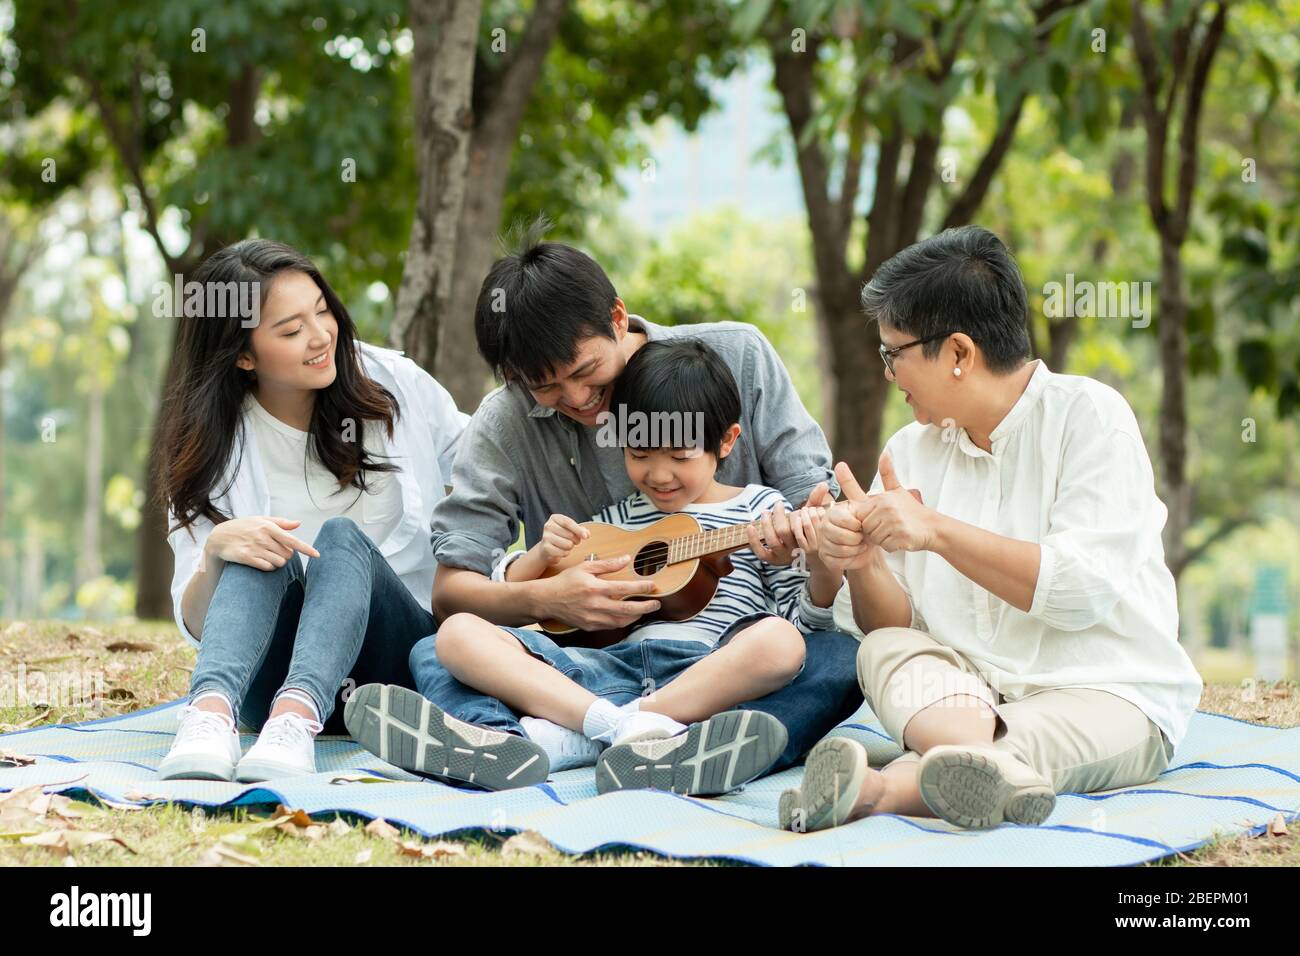 Happy family with grandma, mom with dad teaching son playing guitar and  sing a song in park, Enjoy and relax people picnic outside Stock Photo -  Alamy